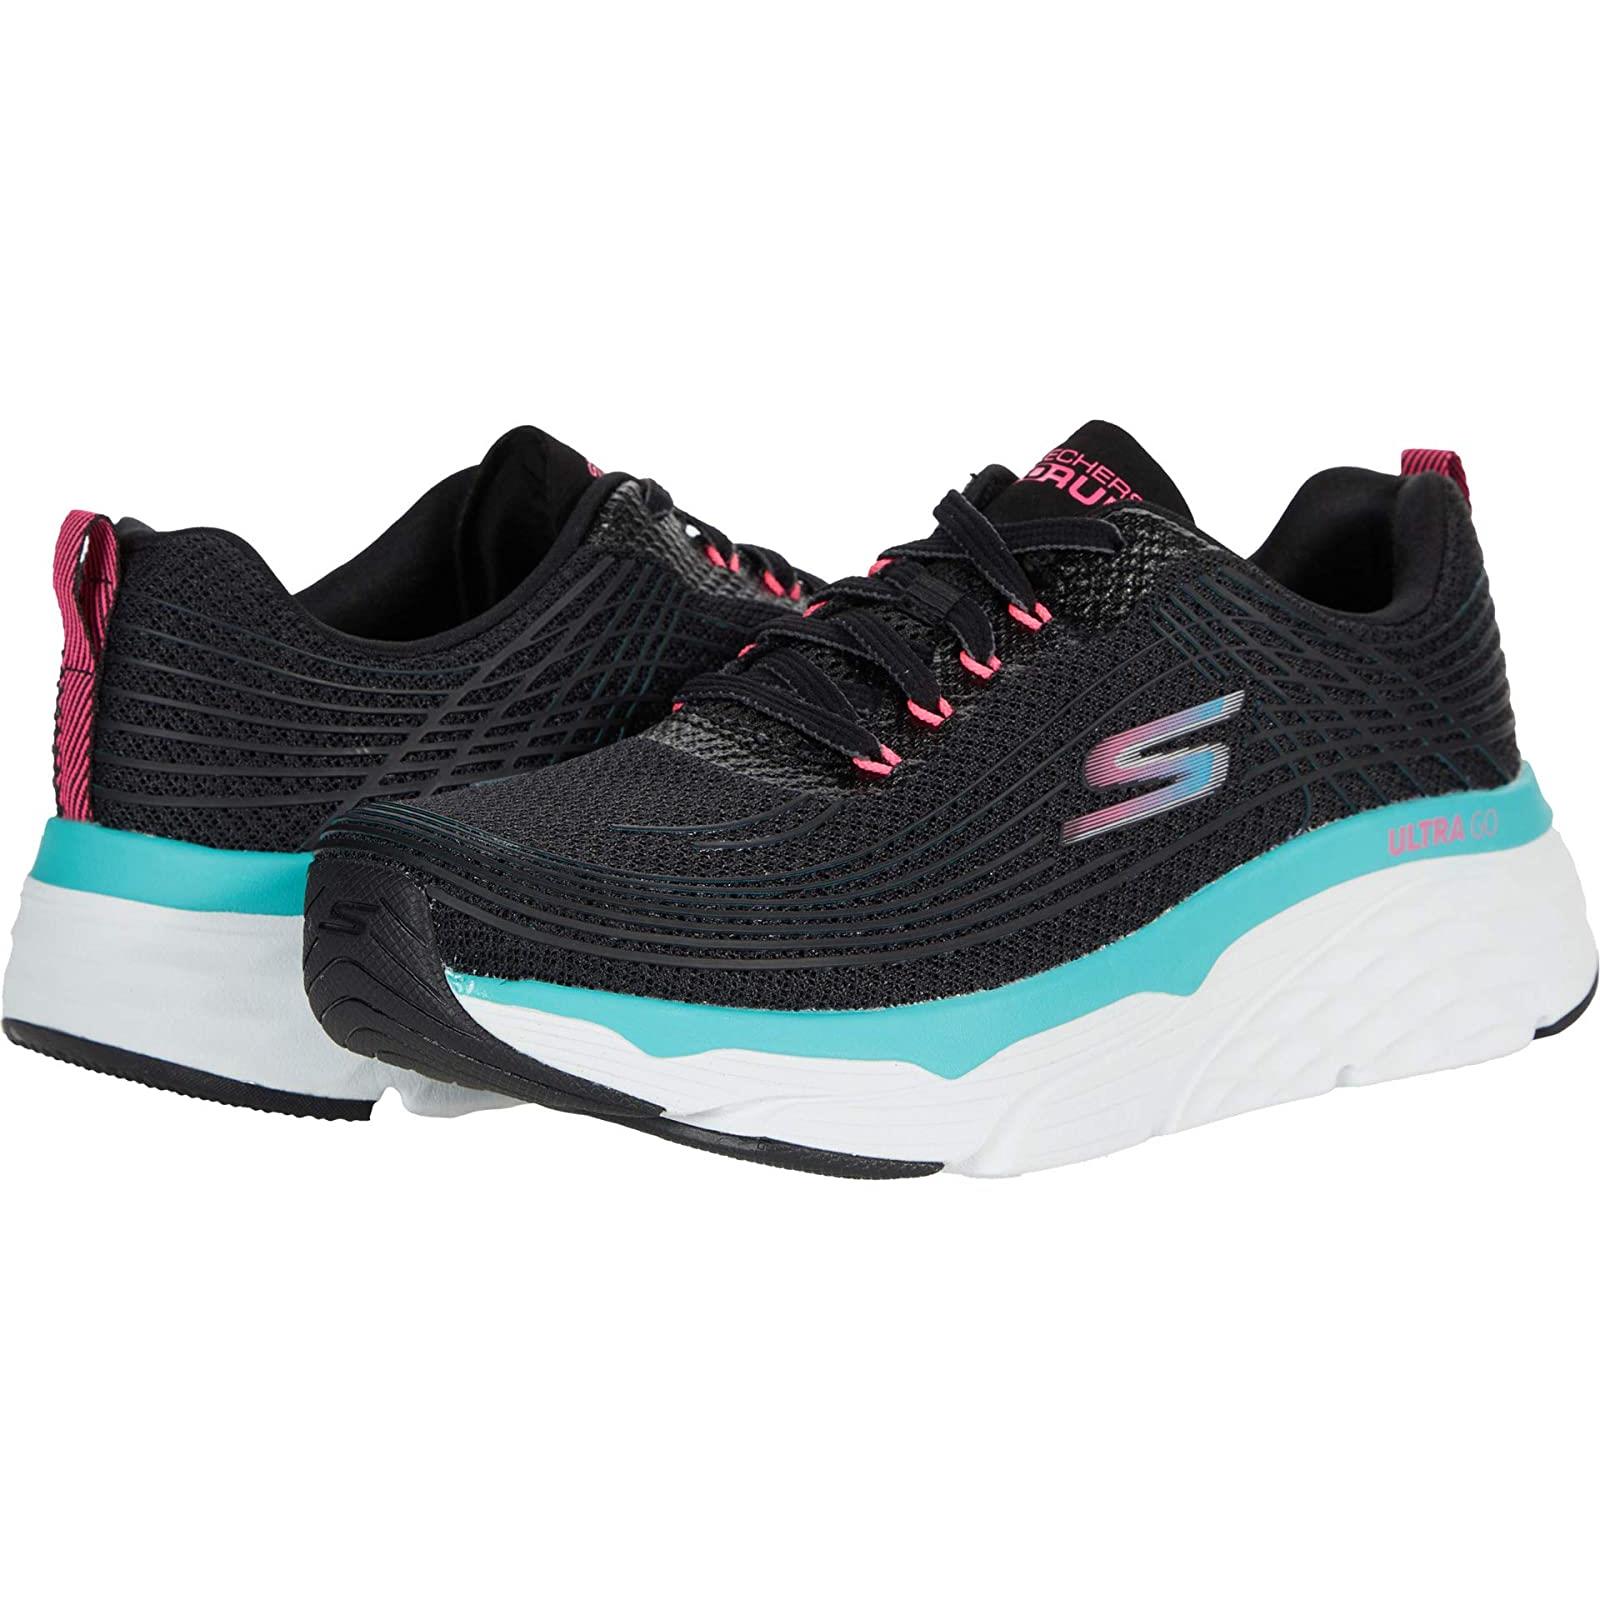 Woman`s Sneakers Athletic Shoes Skechers Max Cushion - 17693 Black/Multi